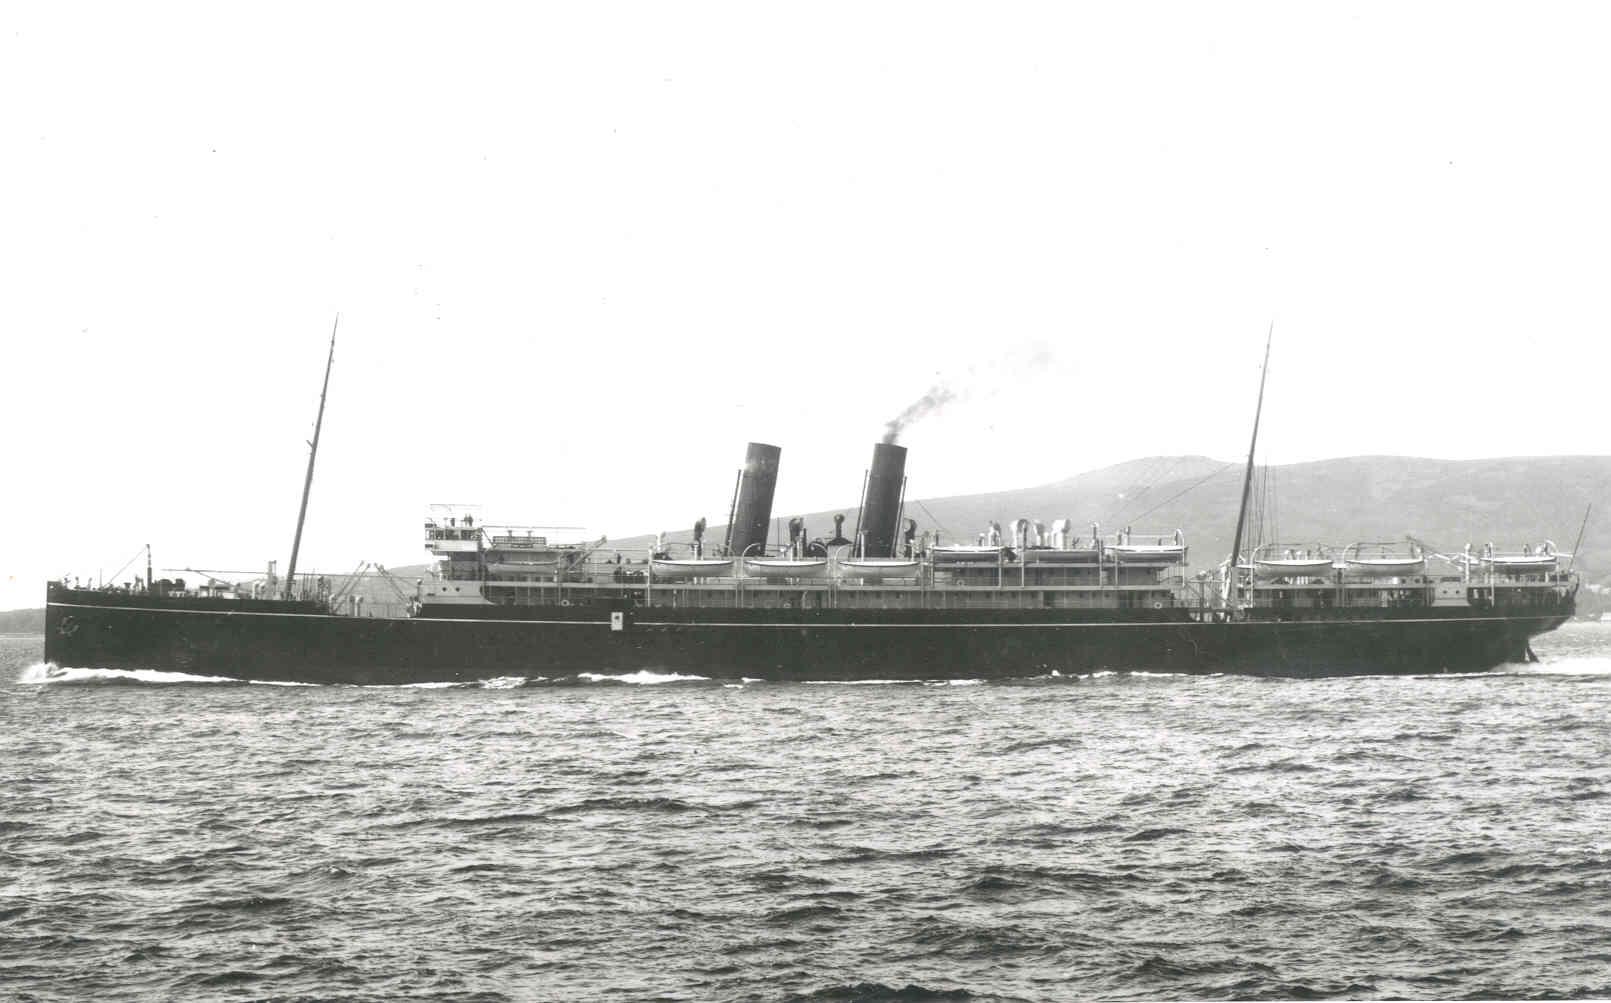 Passenger vessel "Moldavia", built in 1903 by Caird & Co - Greenock.  This vessel took her first voyage in 1903 and operated the route between the Uk and Australia via the Suez canal for P & O.  In 1915 she was commandeered as an armed merchant cruiser an